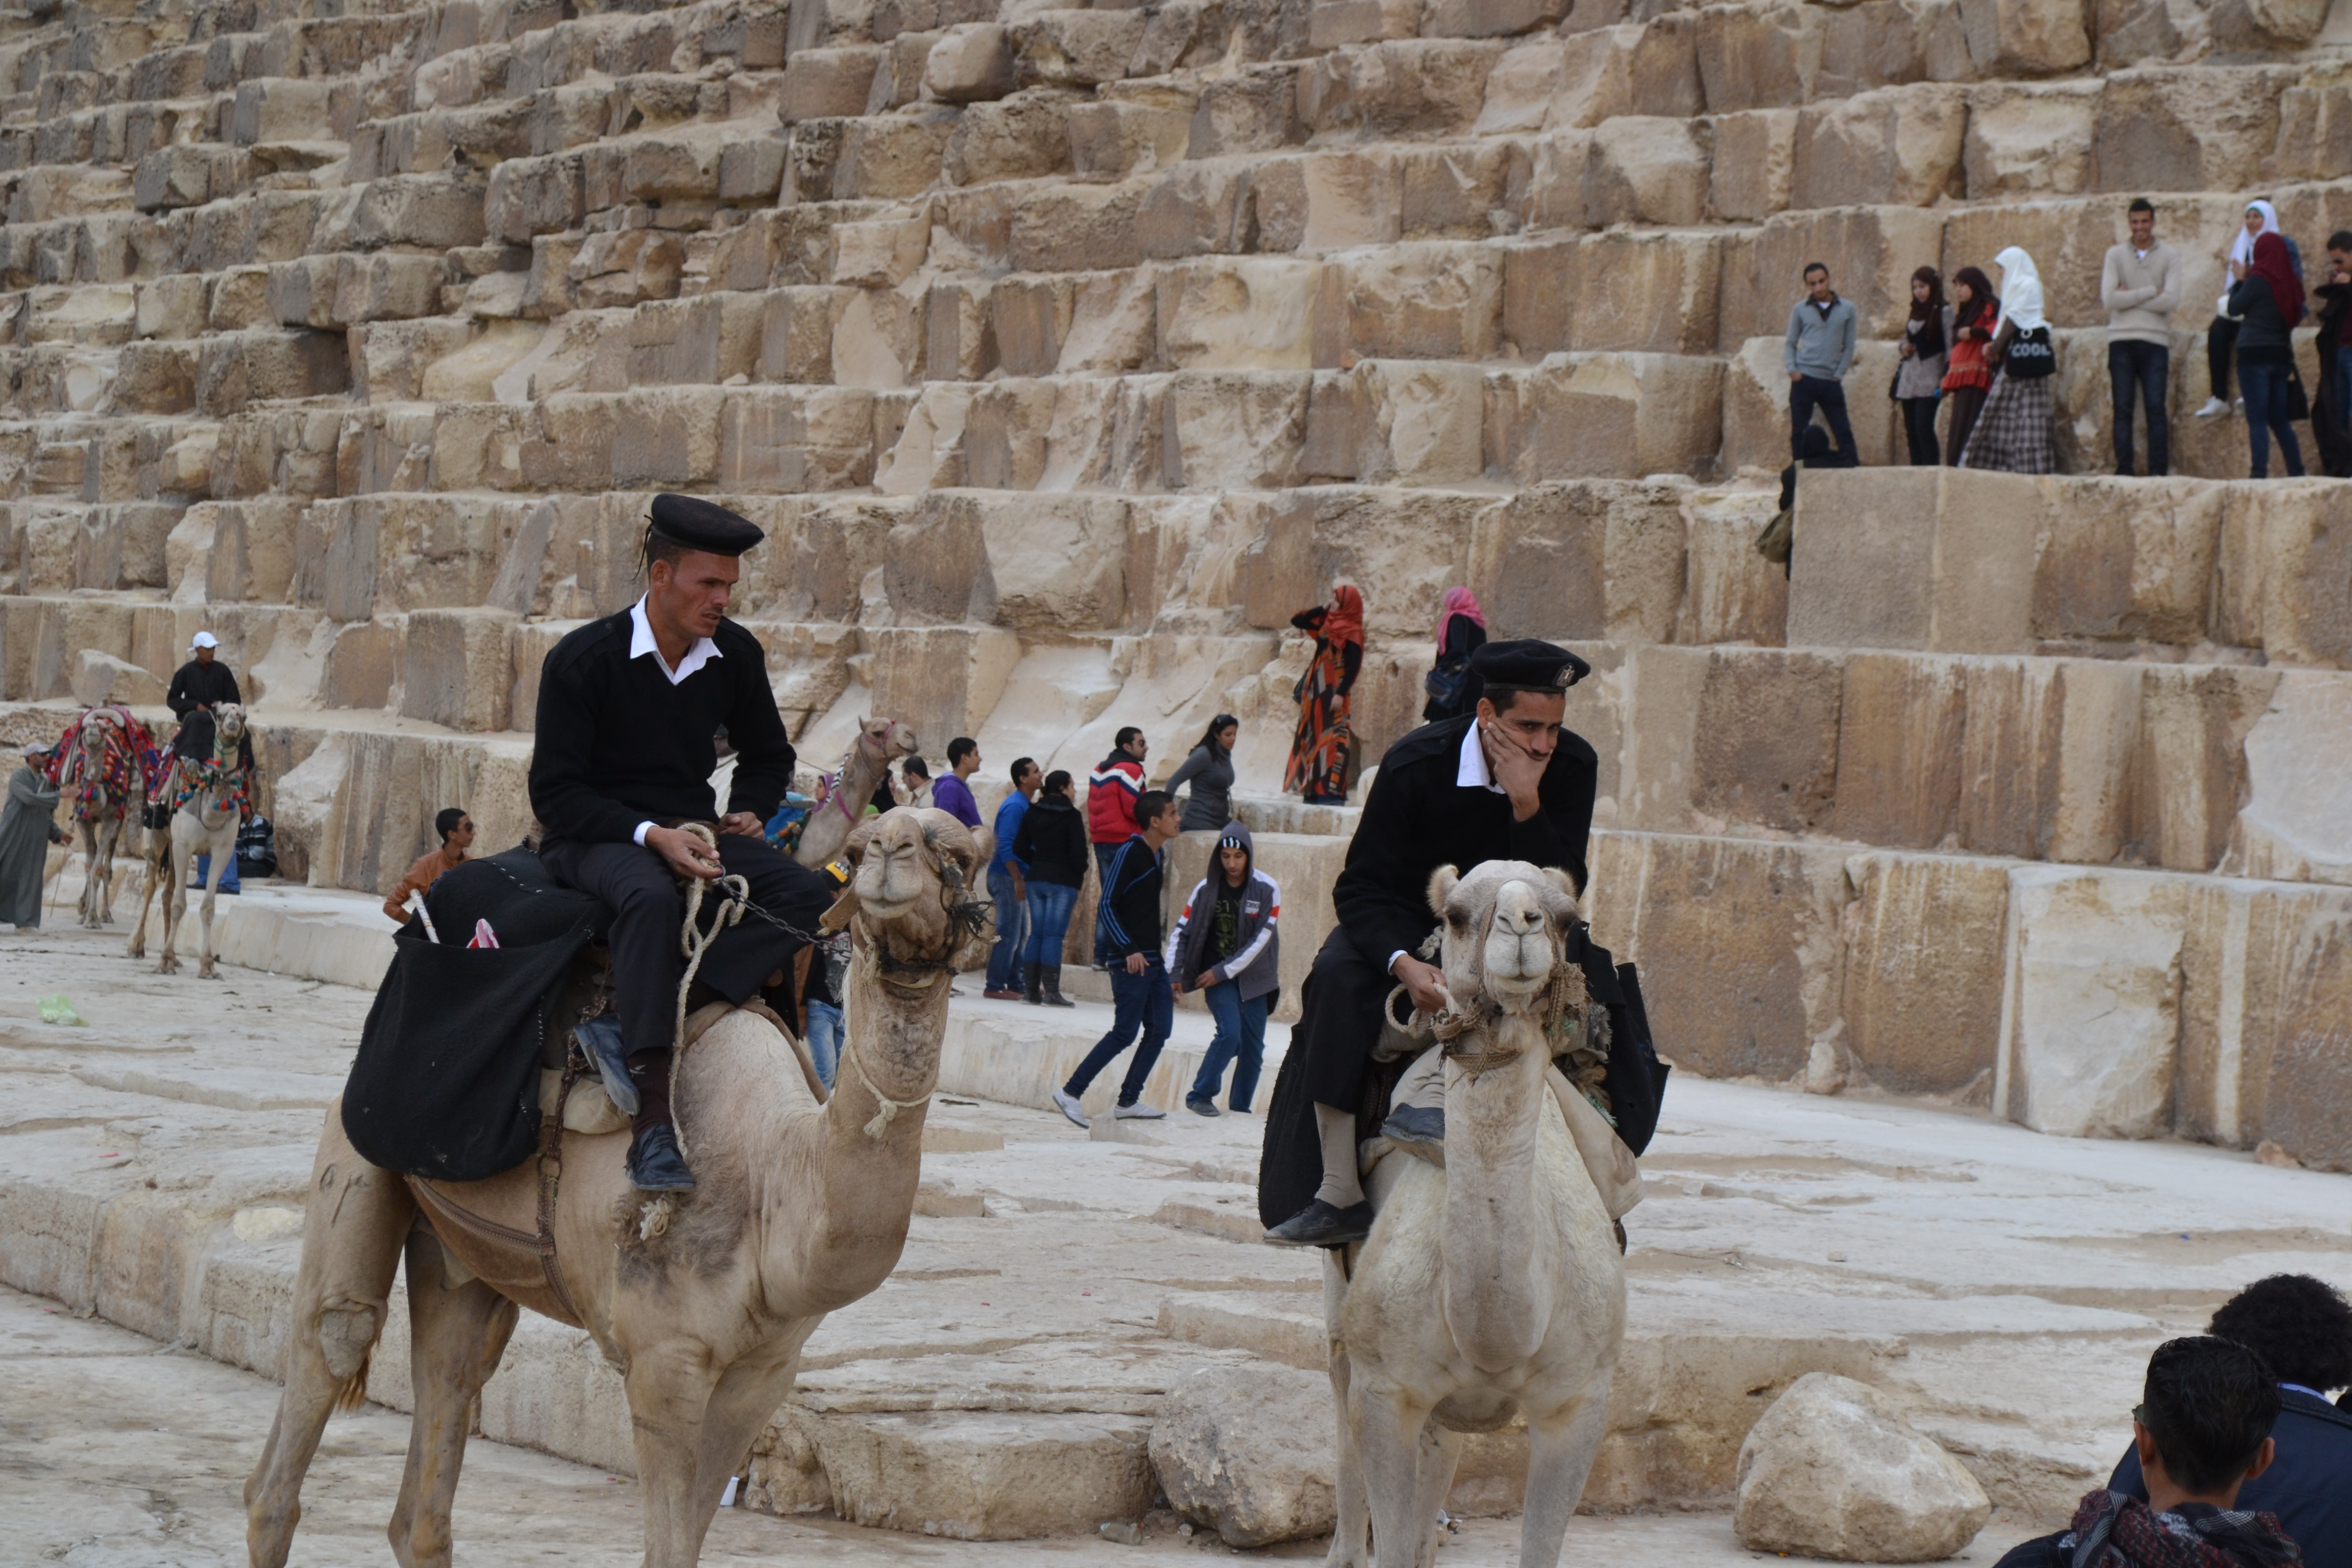 Even the police officers broke the rules and rode their 'security' camels within the vicinity of the Pyramids.